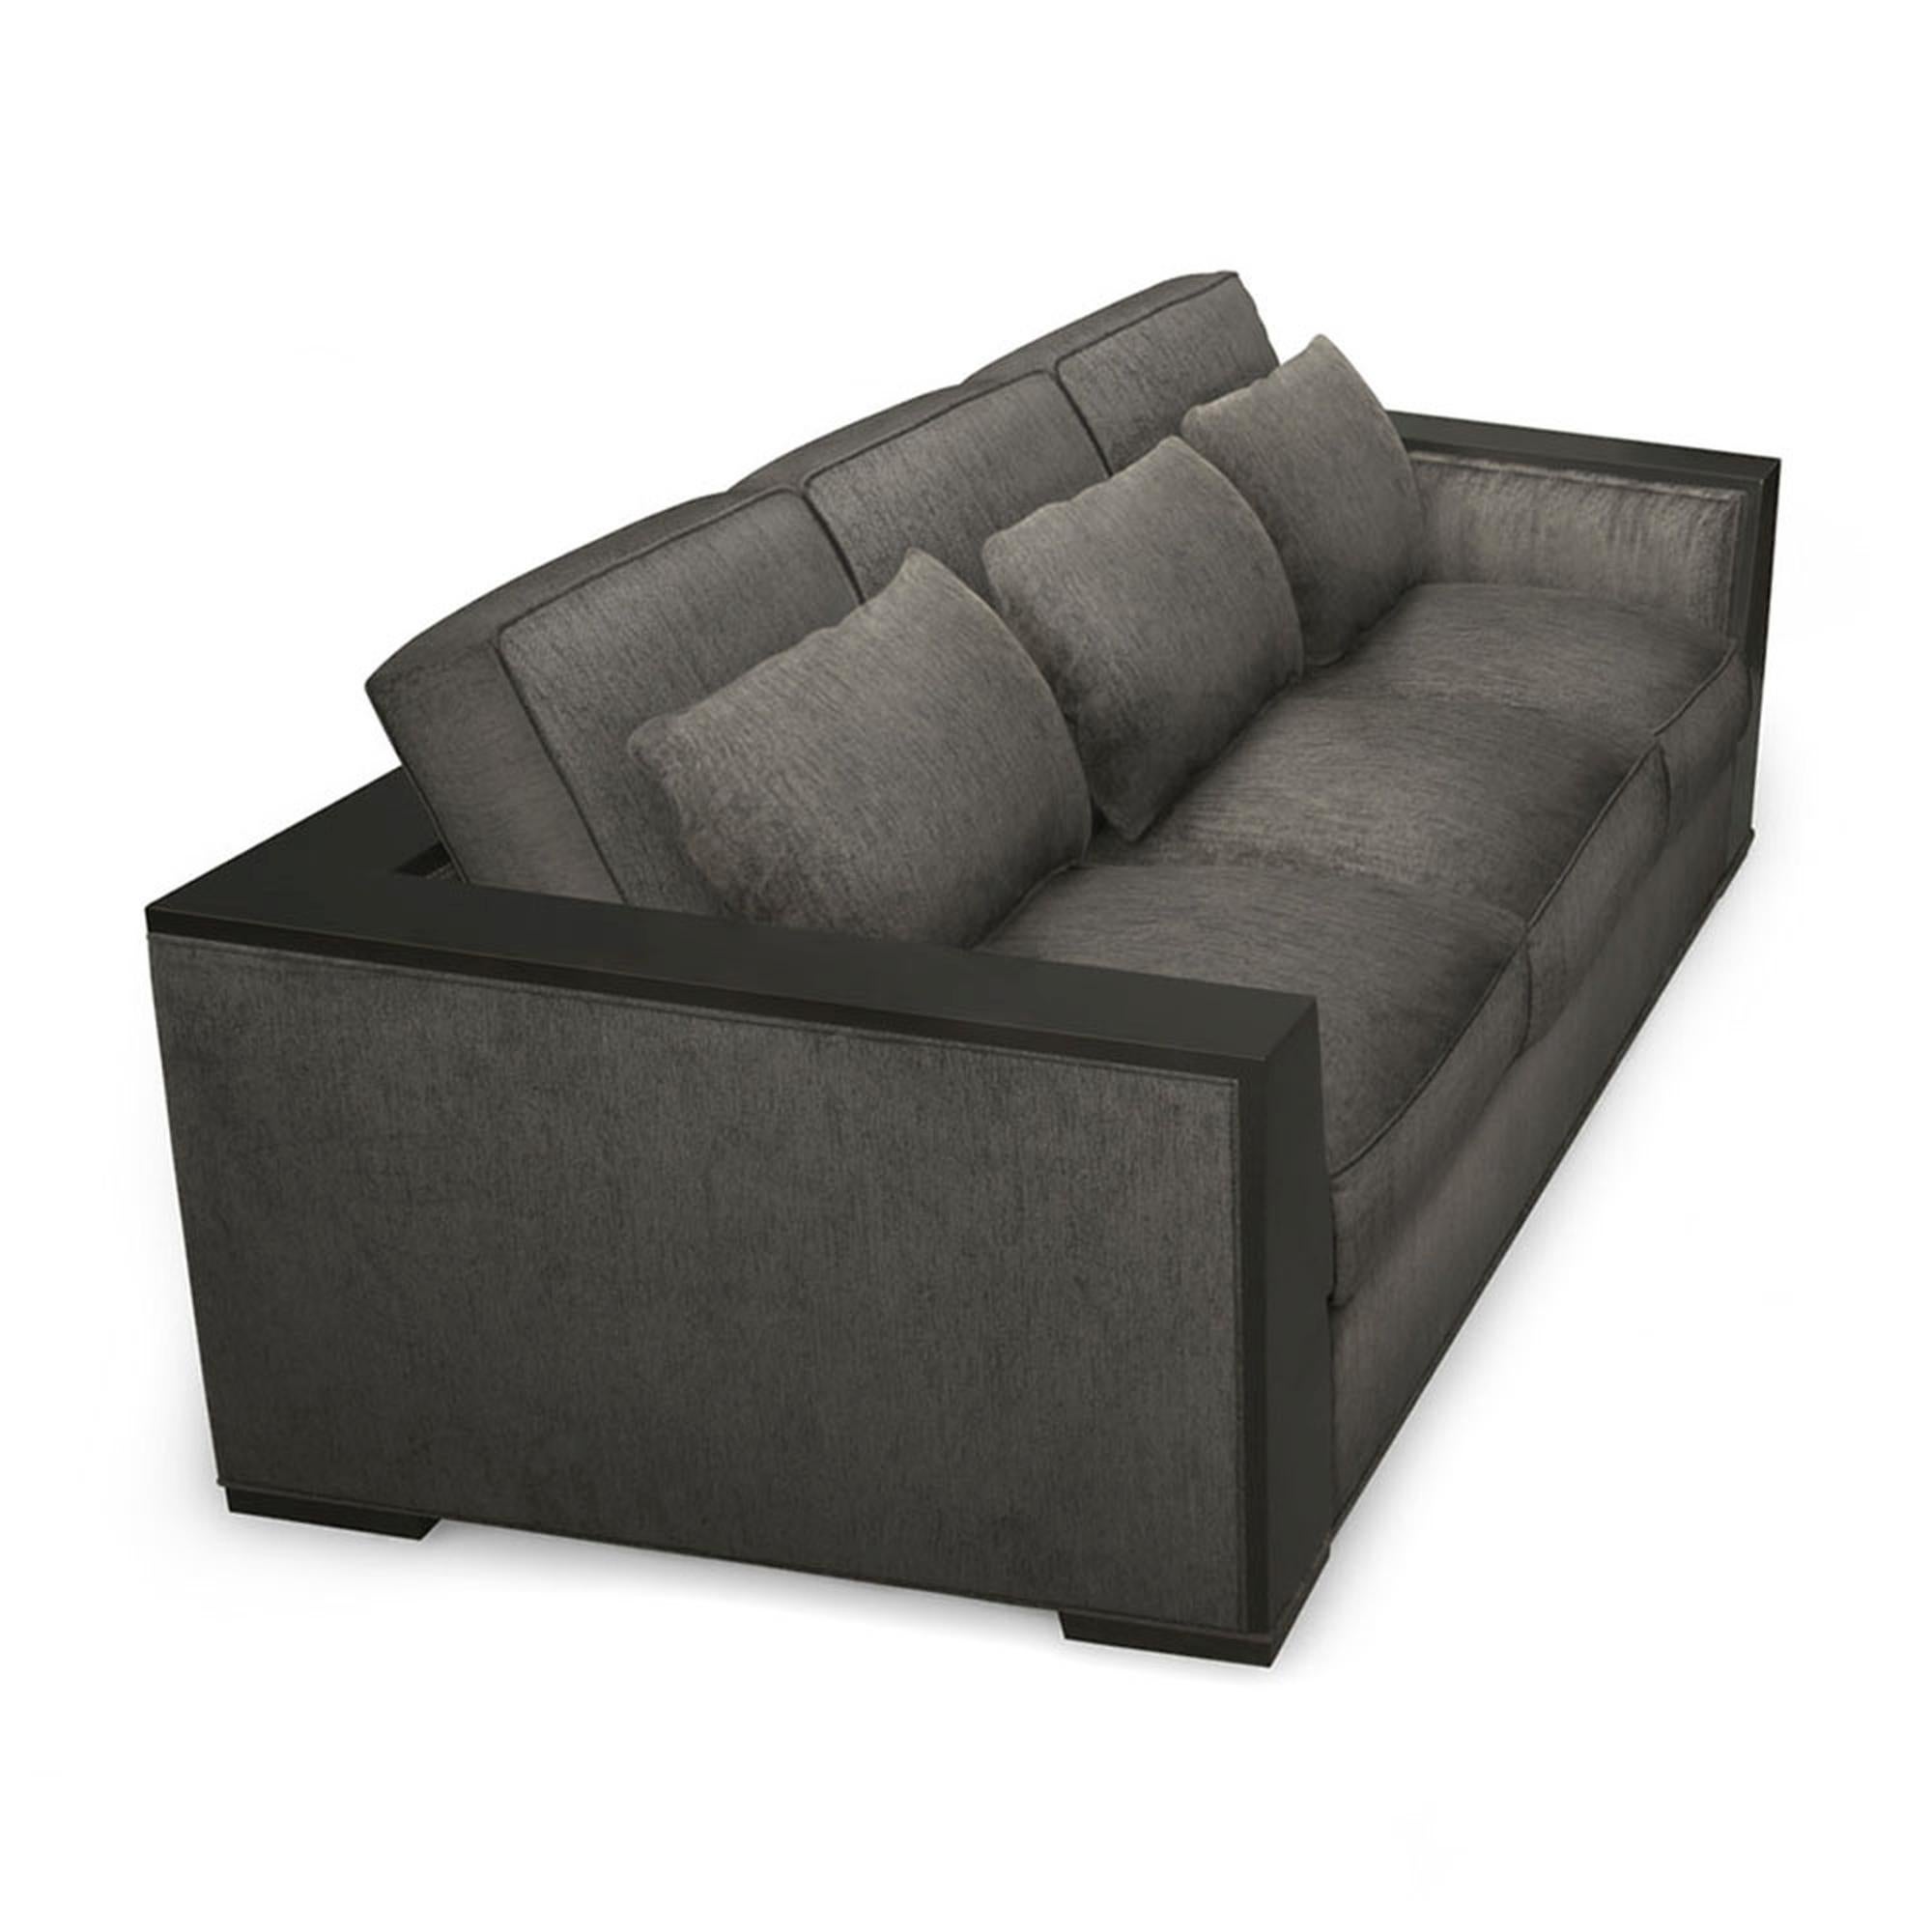 A rich and generous seat, the contemporary Bel air sofa makes a solemn and substantial contribution to any room in which it sits. With a sleek wood frame, this chair is fully upholstered on all sides, and is luxuriously deep. The down wrapped foam